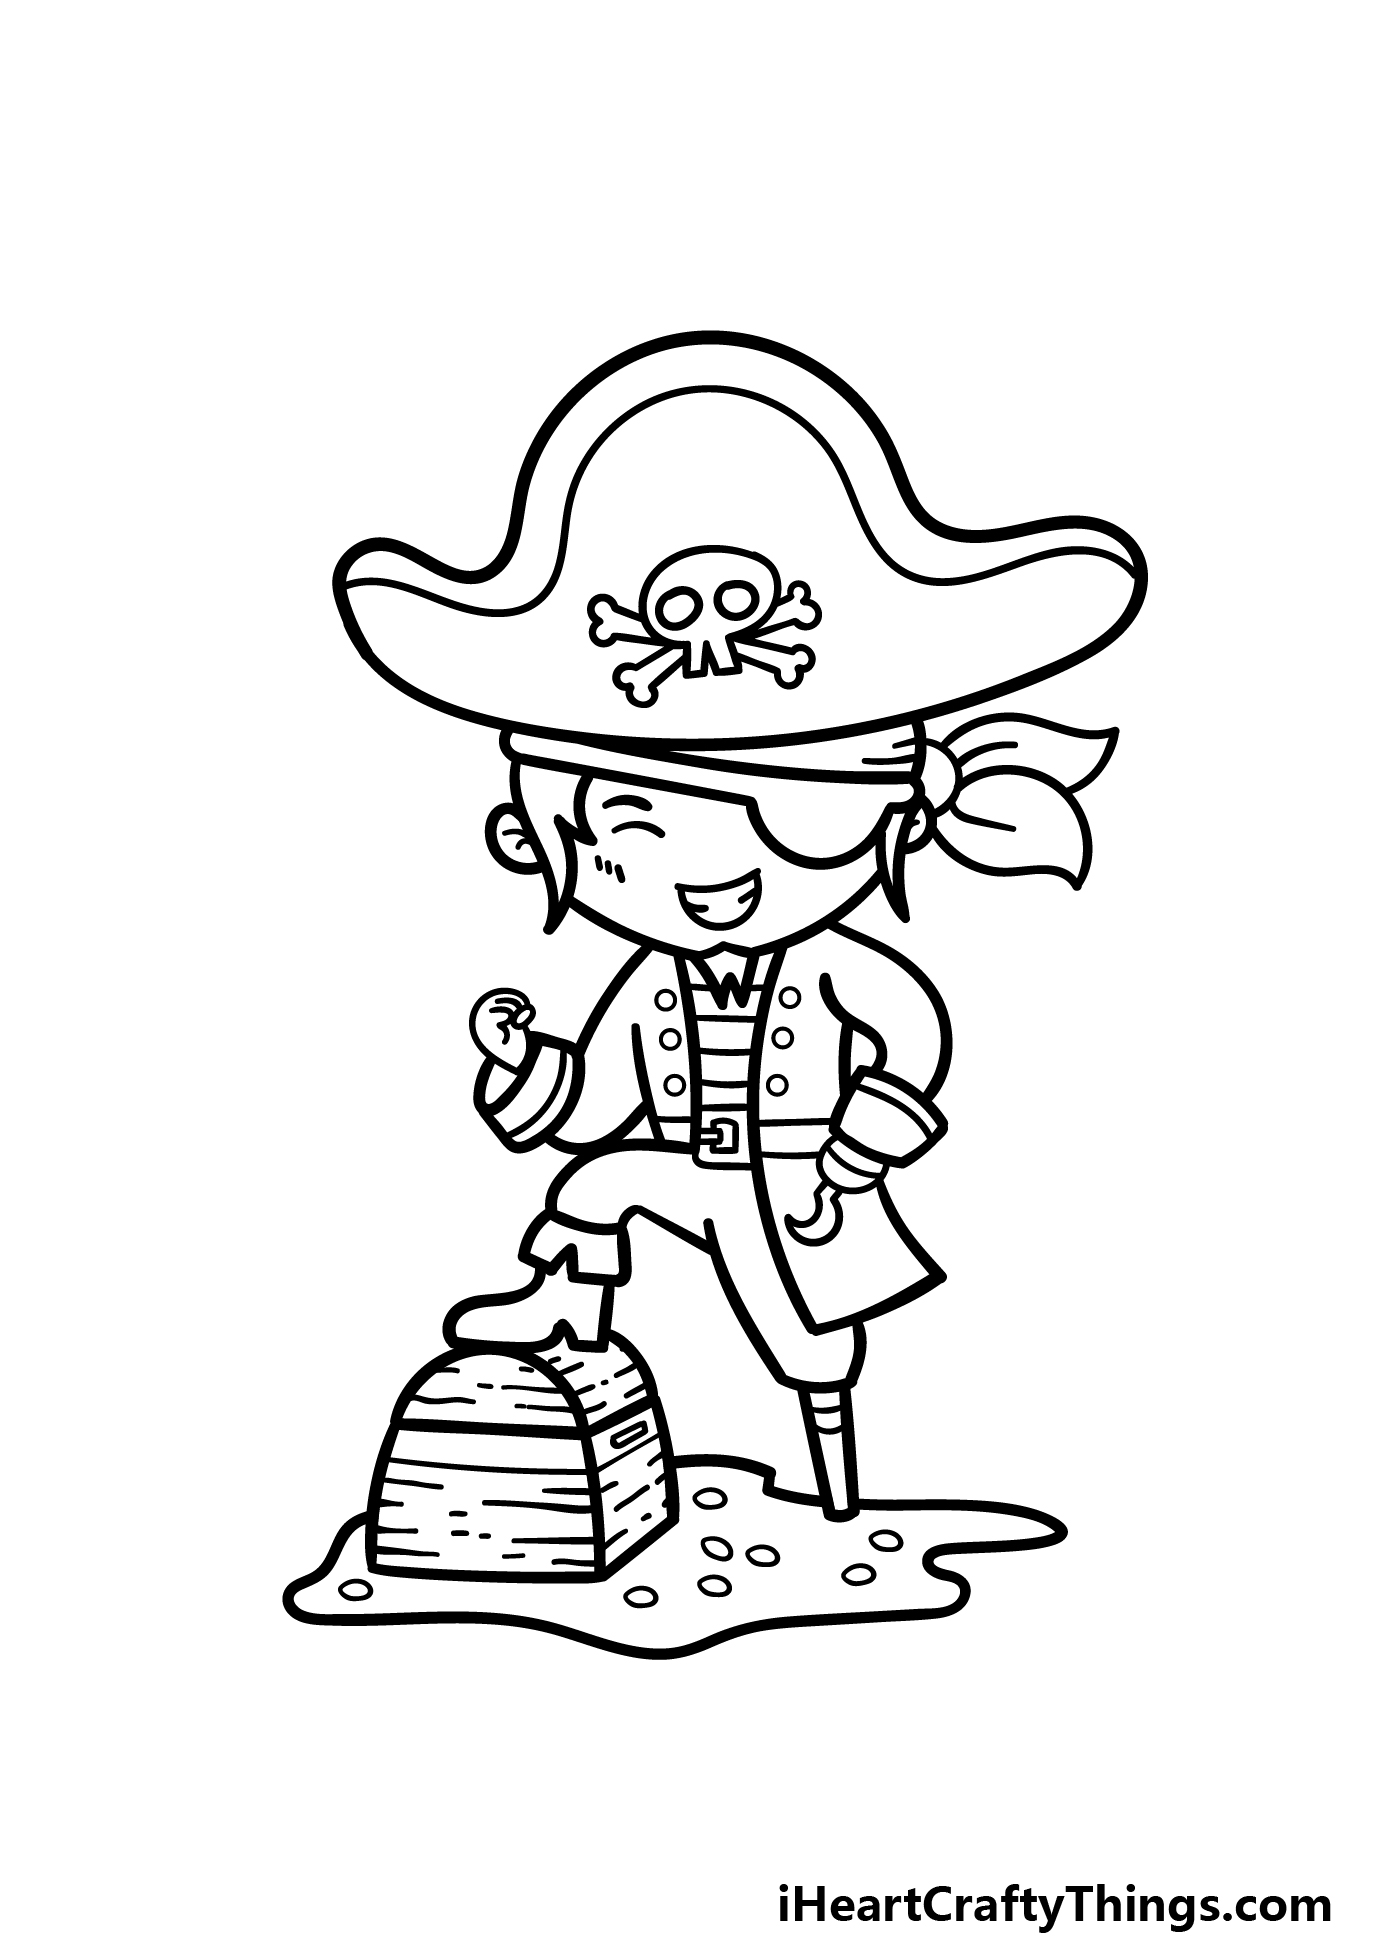 how to draw a cartoon pirate step 8